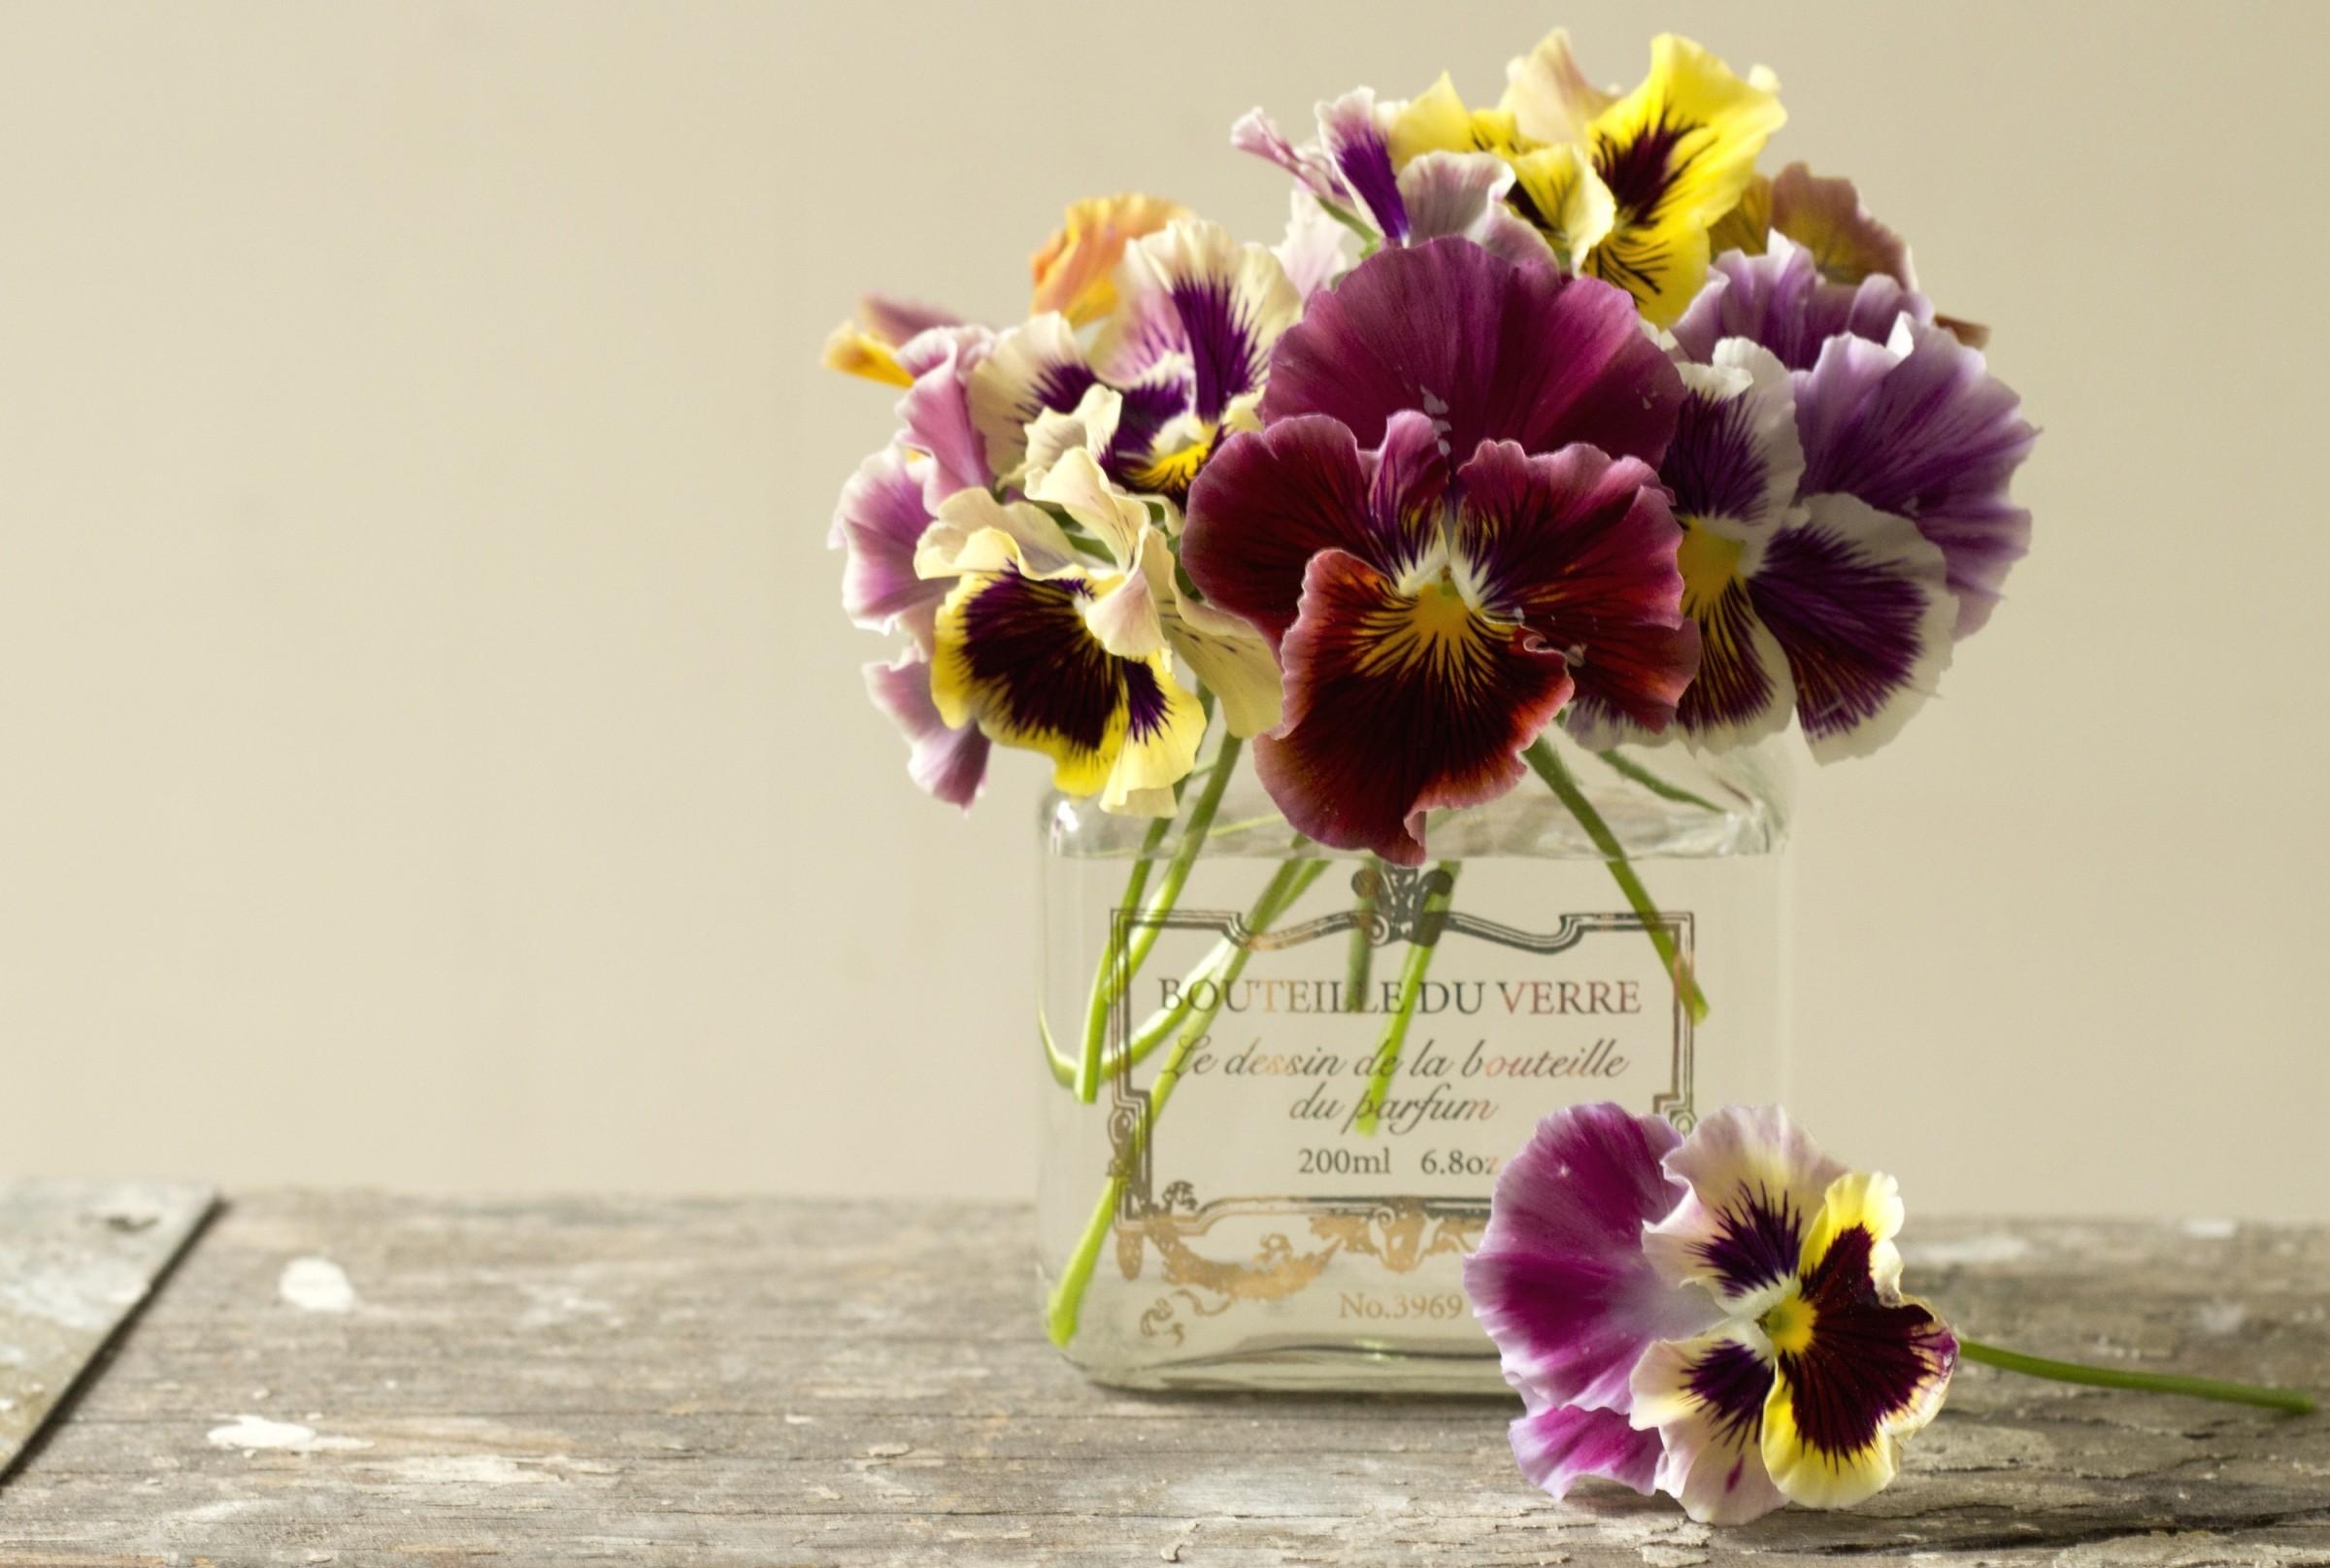 151060 download wallpaper flowers, pansies, bank, bouquet, jar screensavers and pictures for free